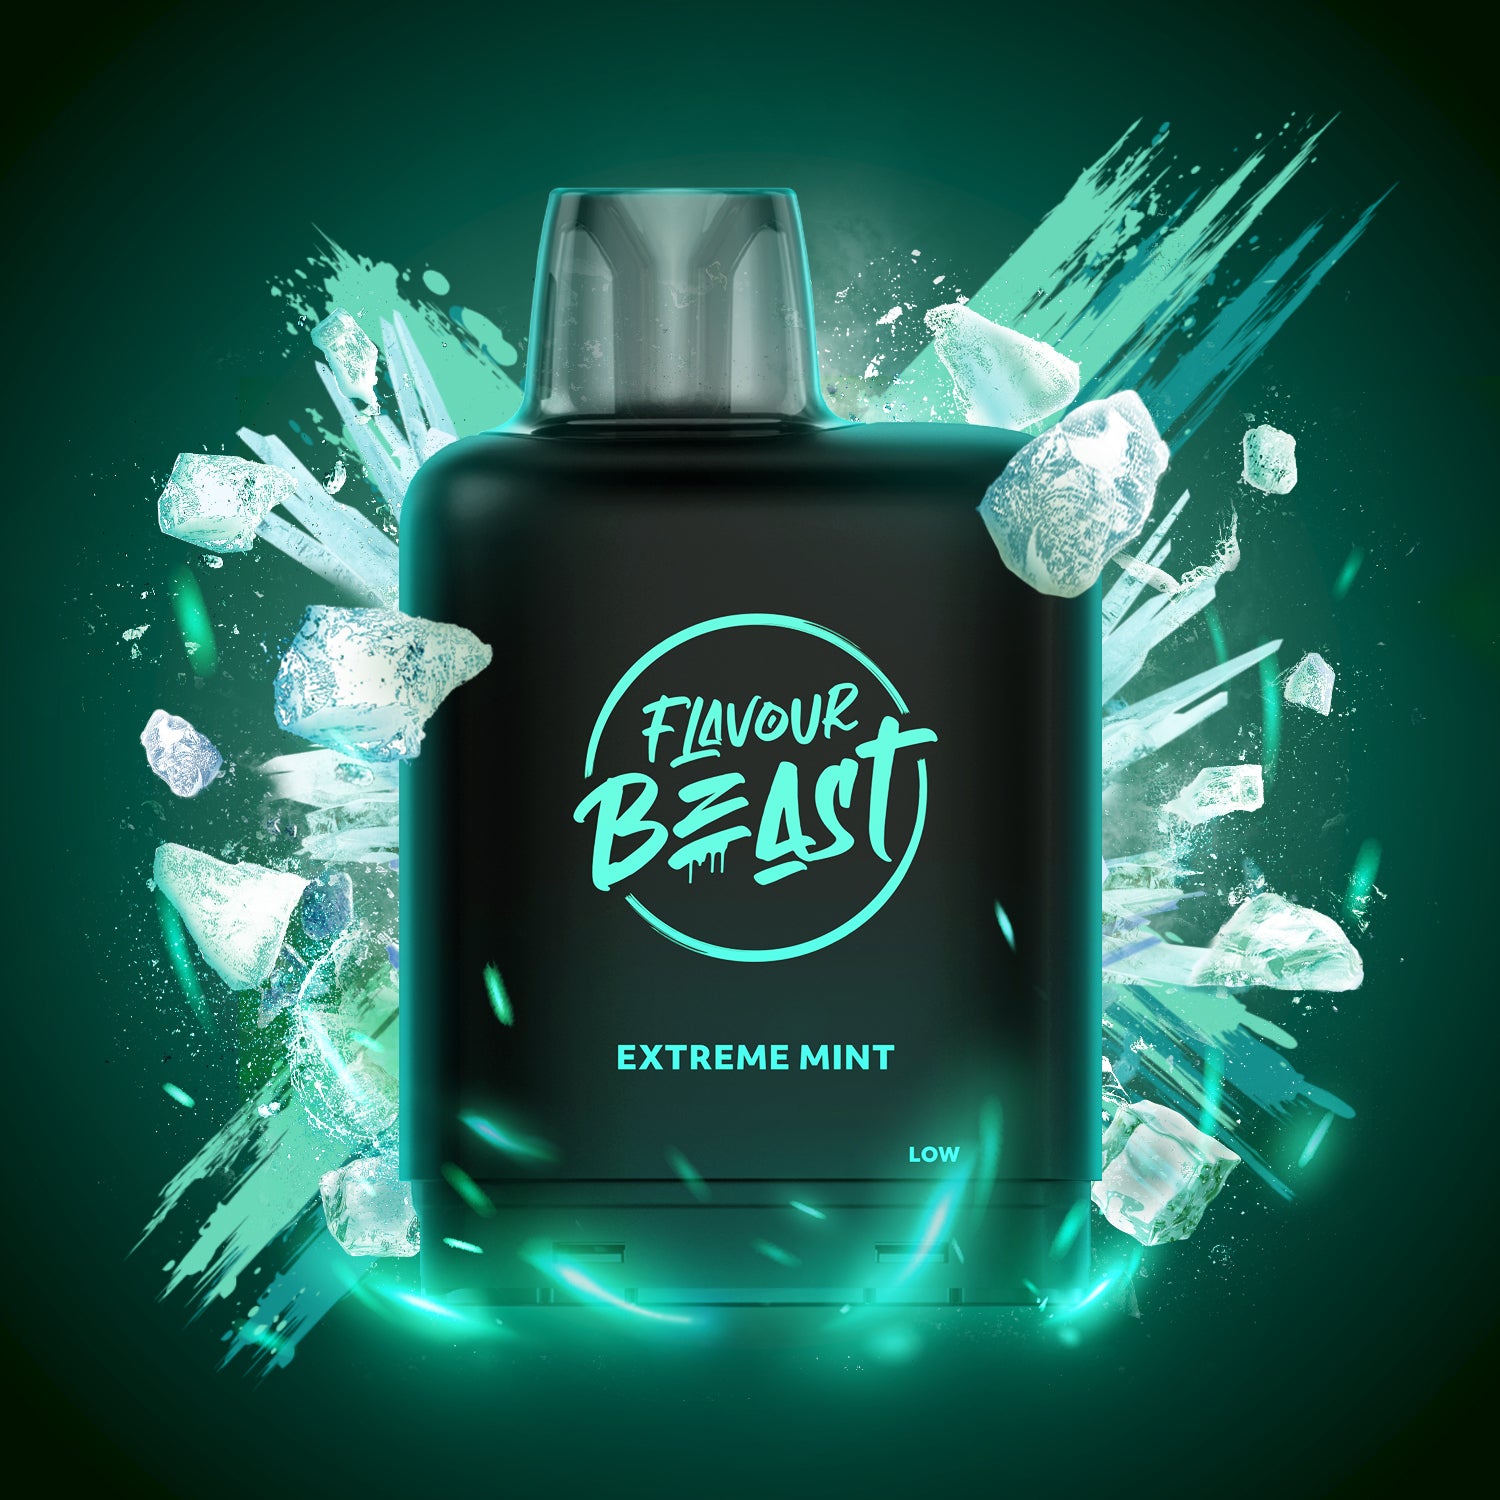 LEVEL X BOOST FLAVOUR BEAST Extreme Mint 20MG